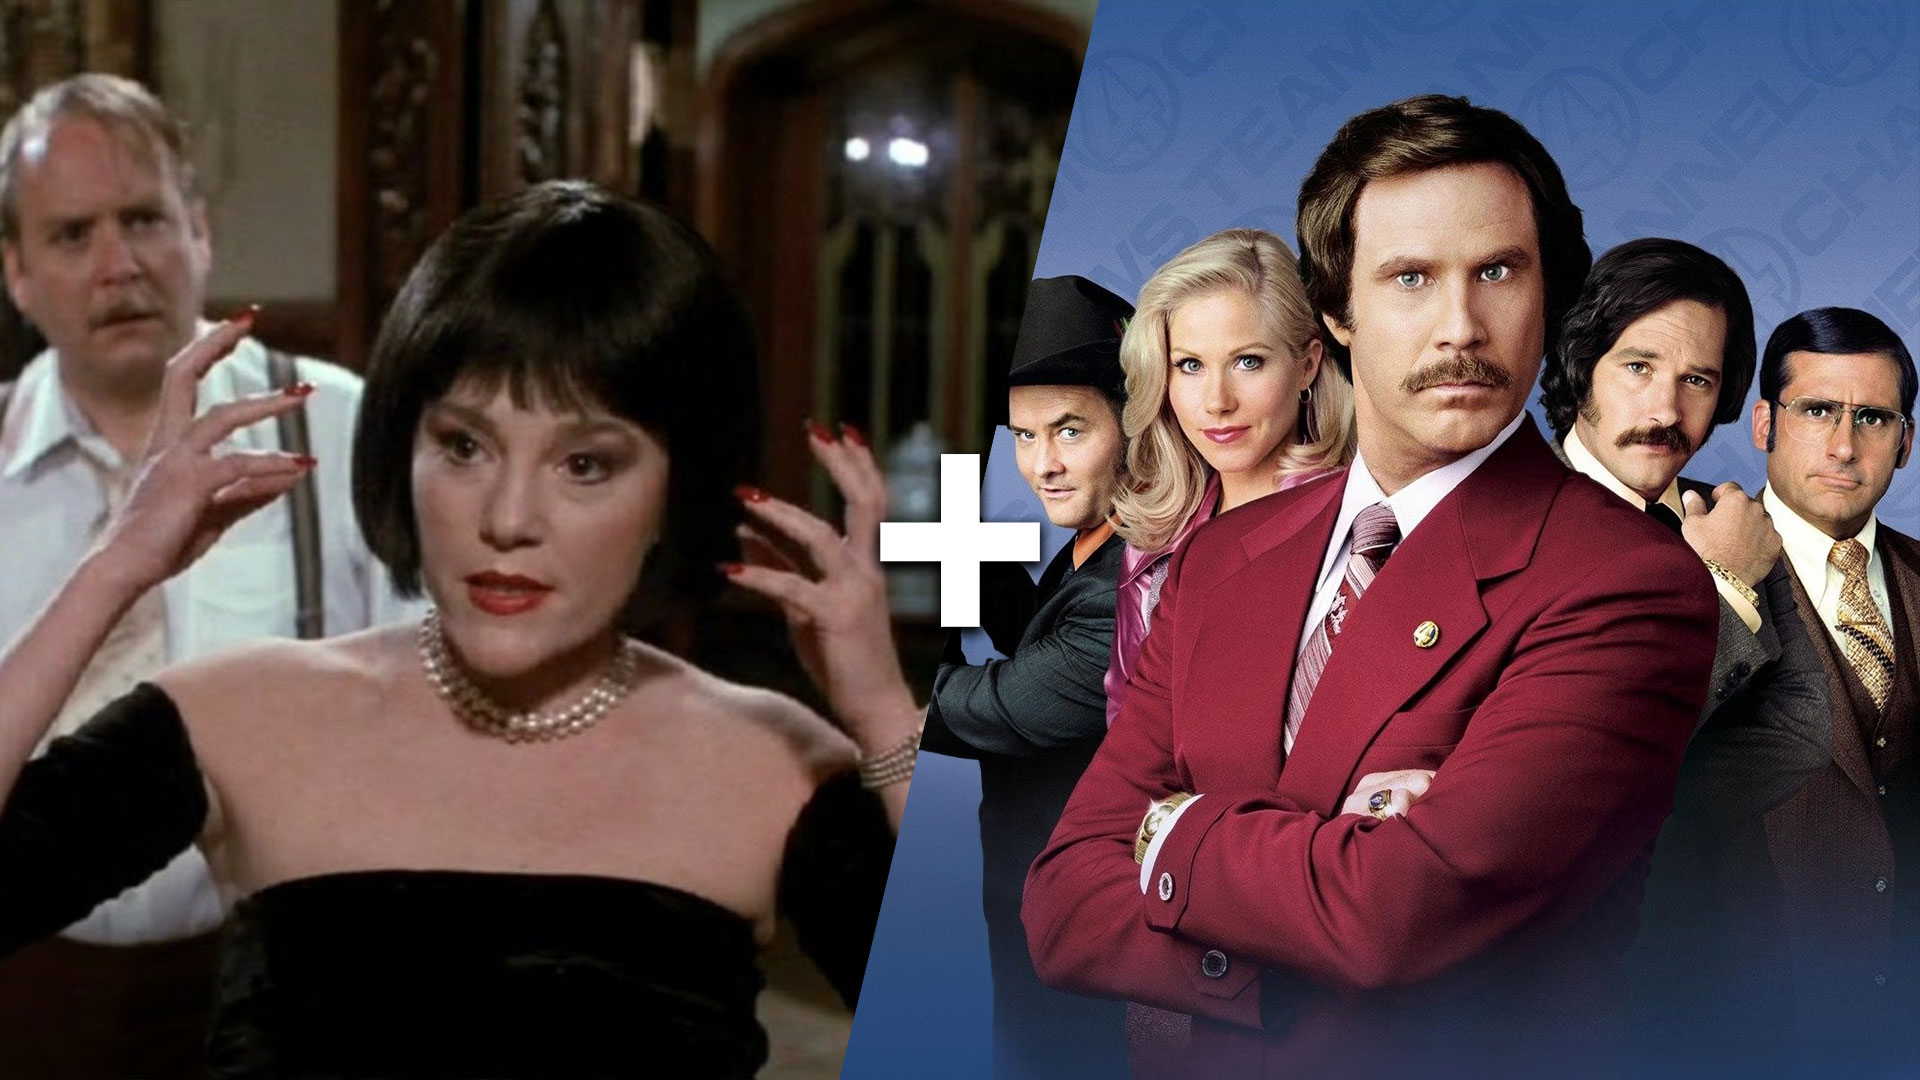 Clue + Anchorman: The Legend of Ron Burgundy